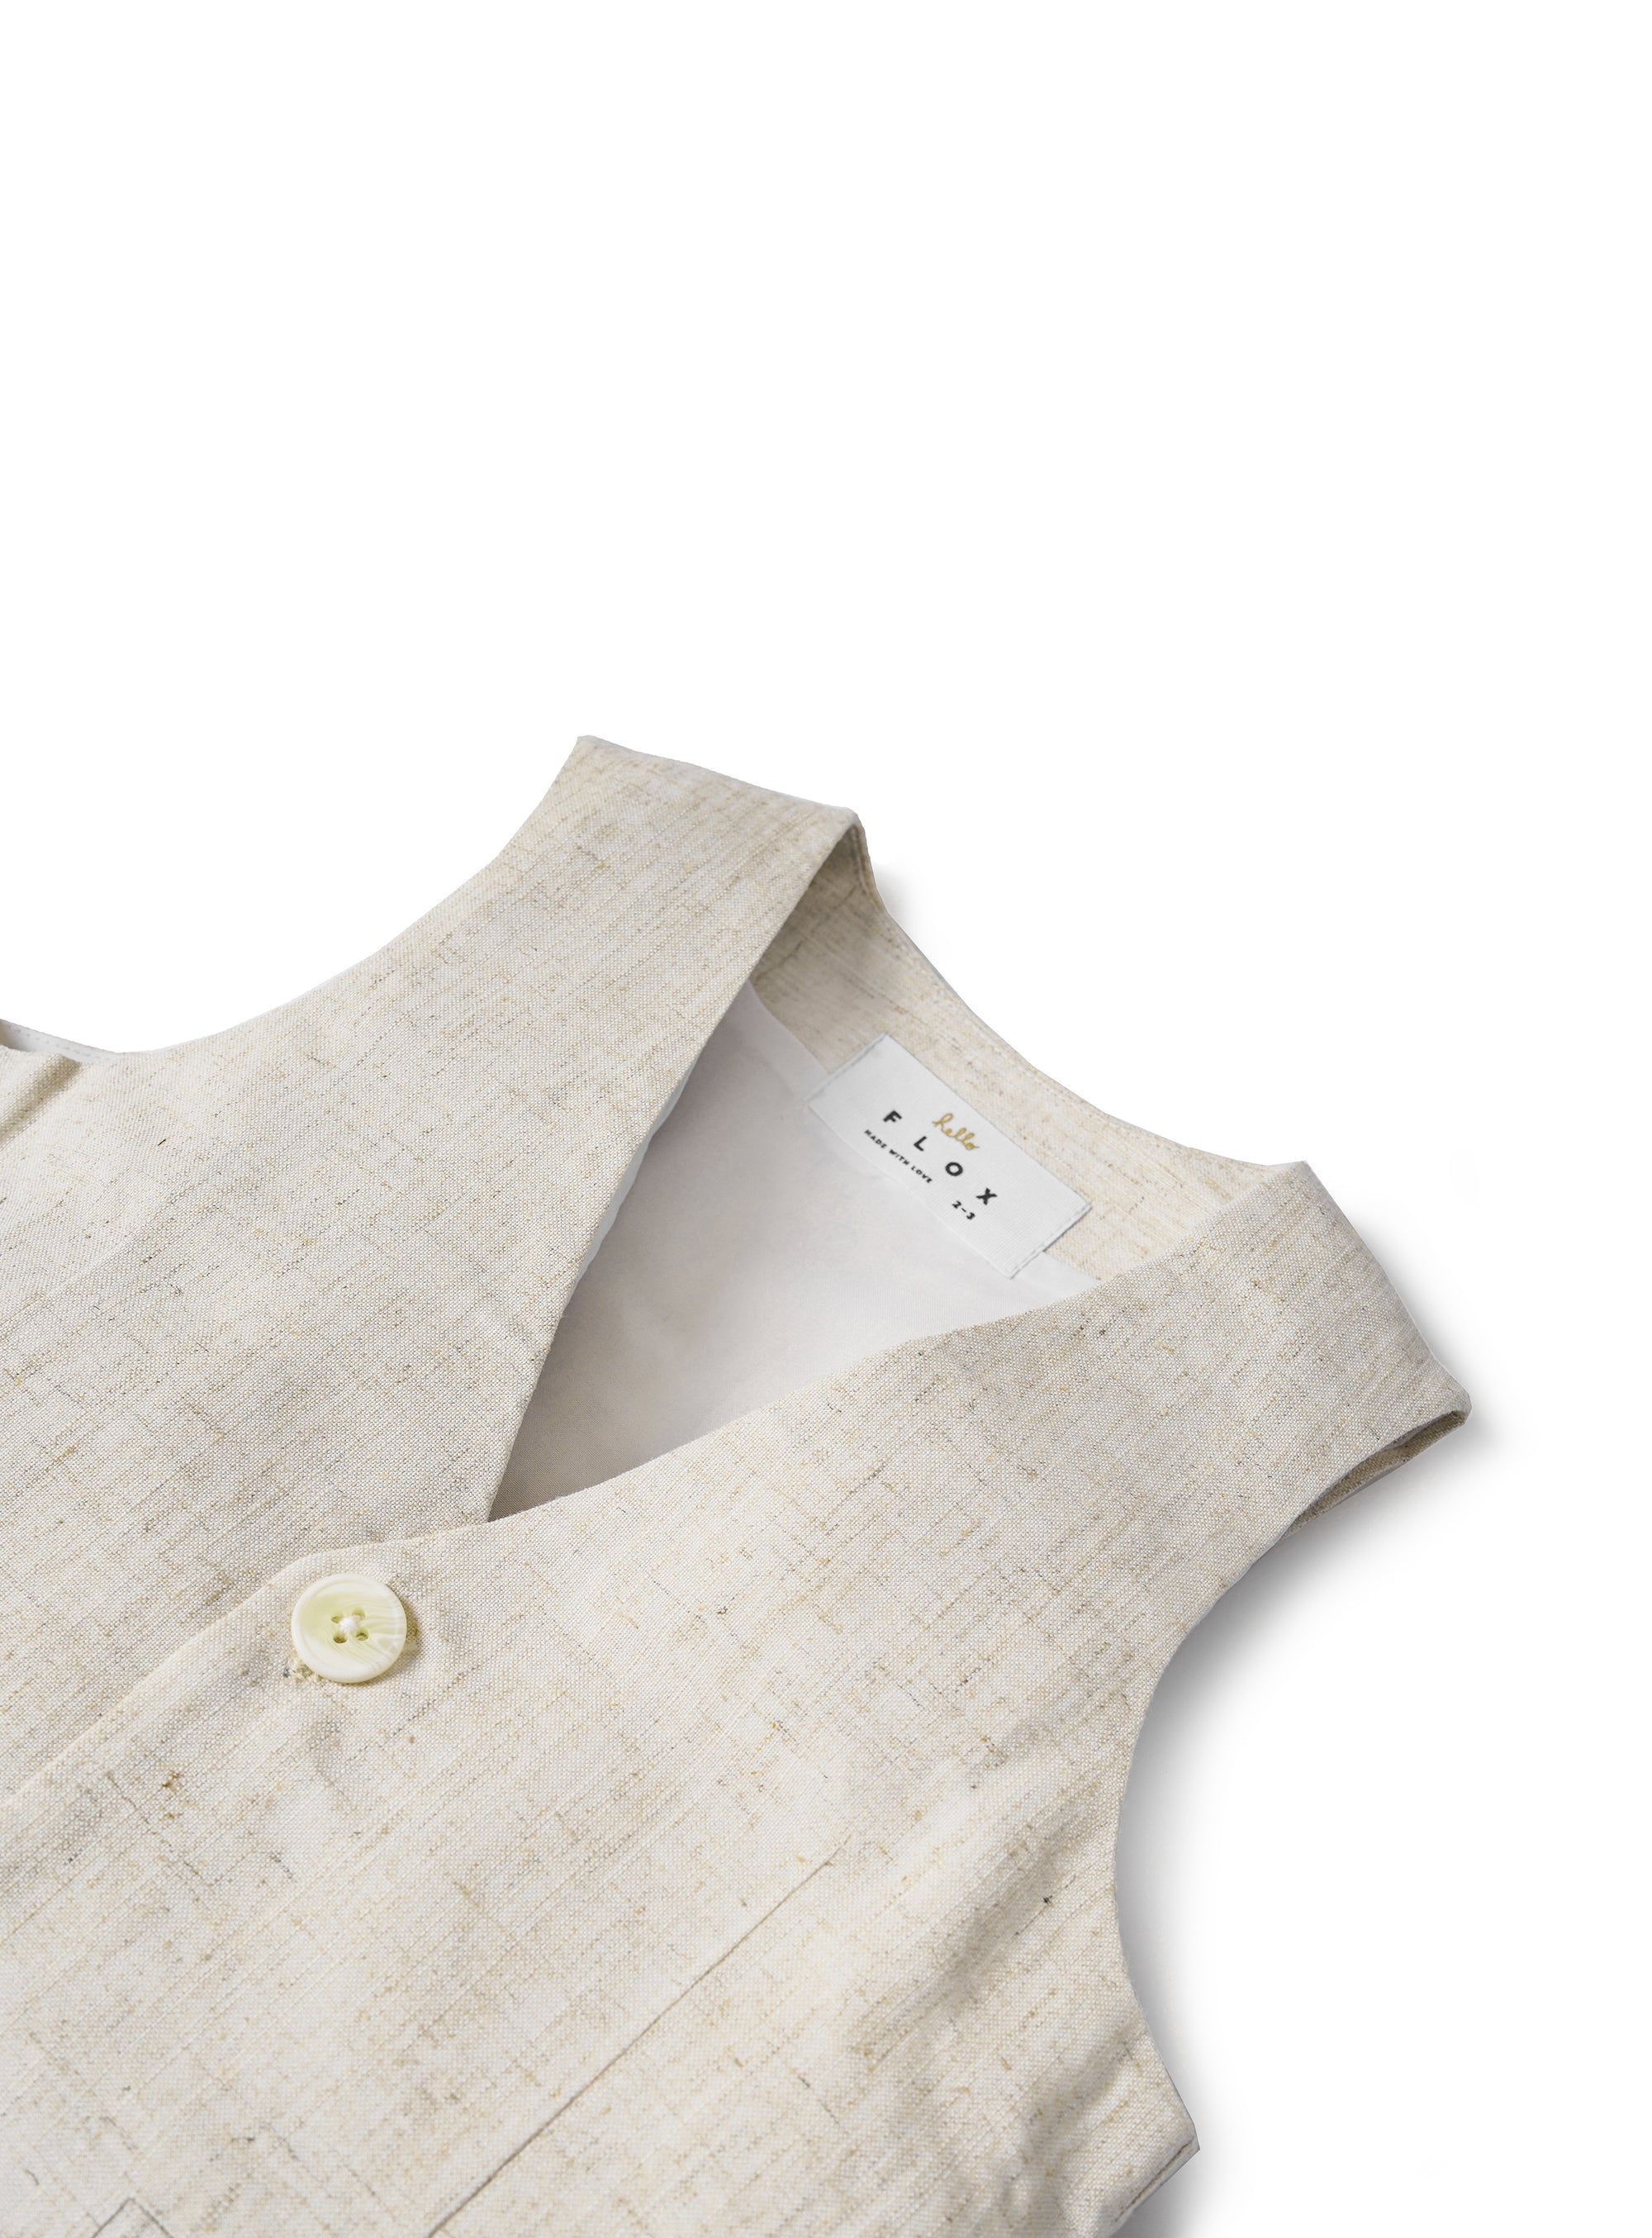 textured sandy beach vest with off white buttons